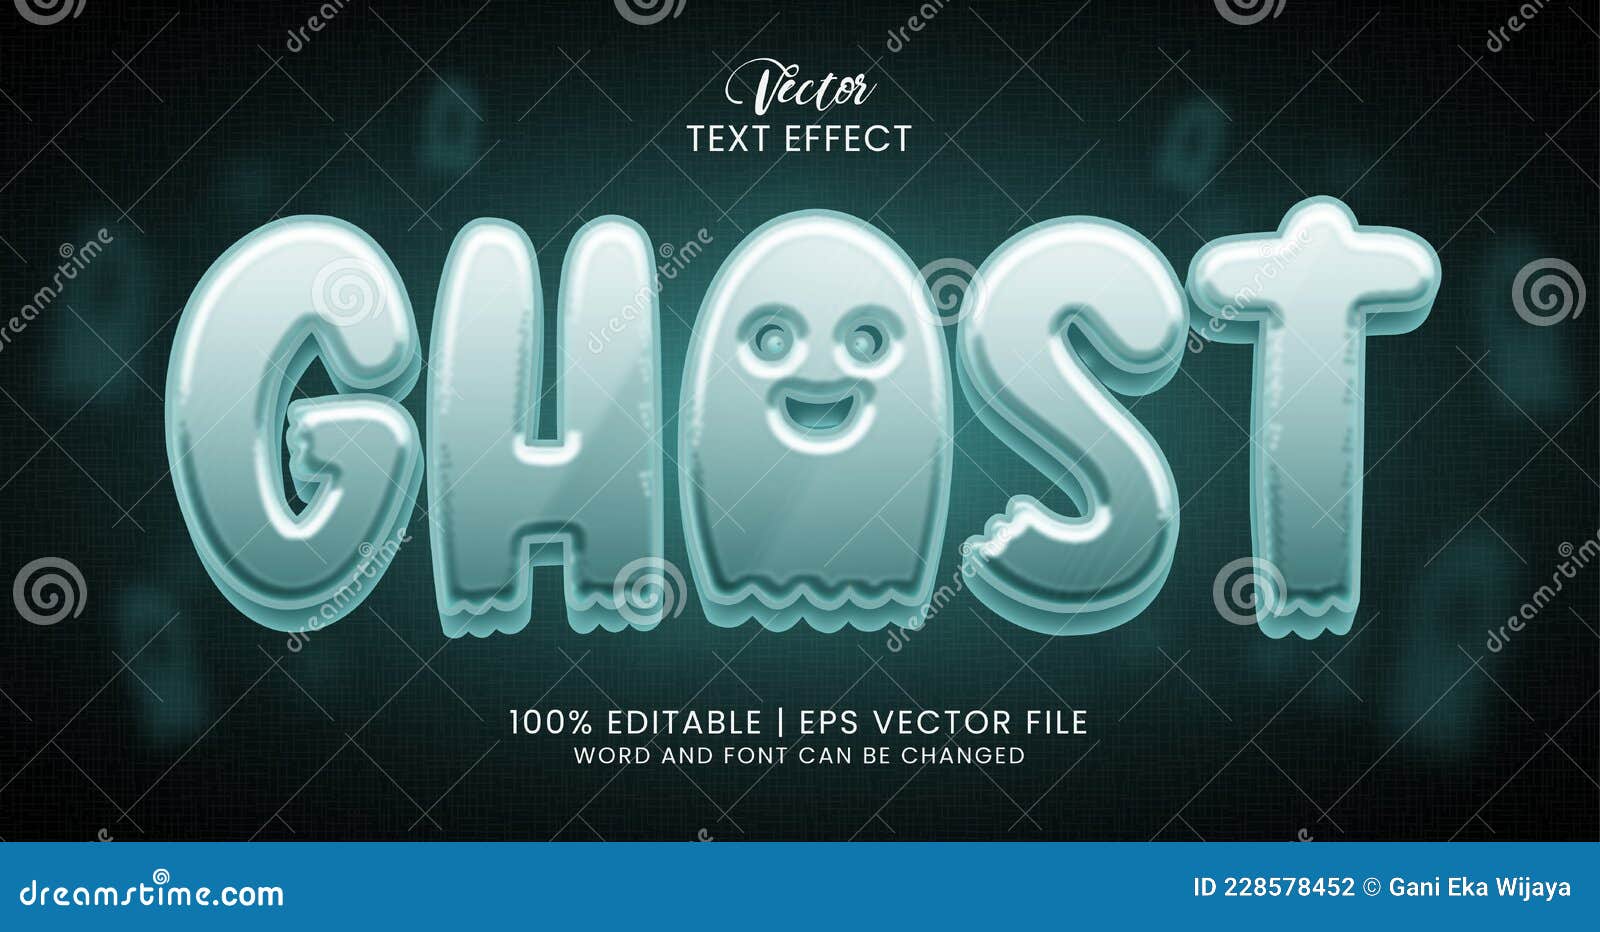 ghost as text